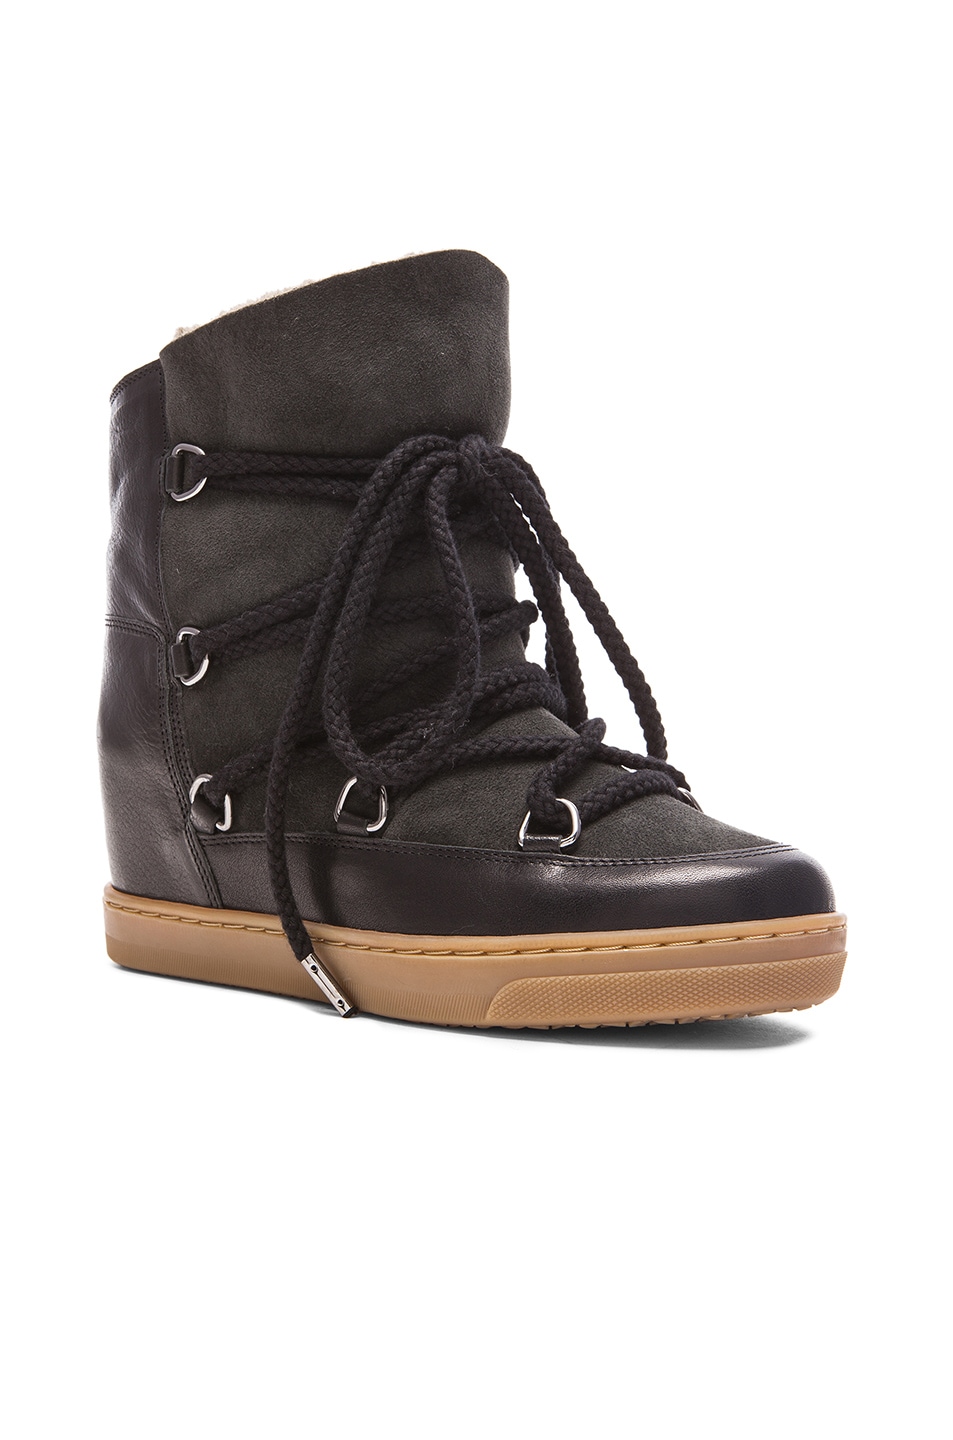 Isabel Marant Etoile Nowles Shearling and Leather Boots in Black | FWRD